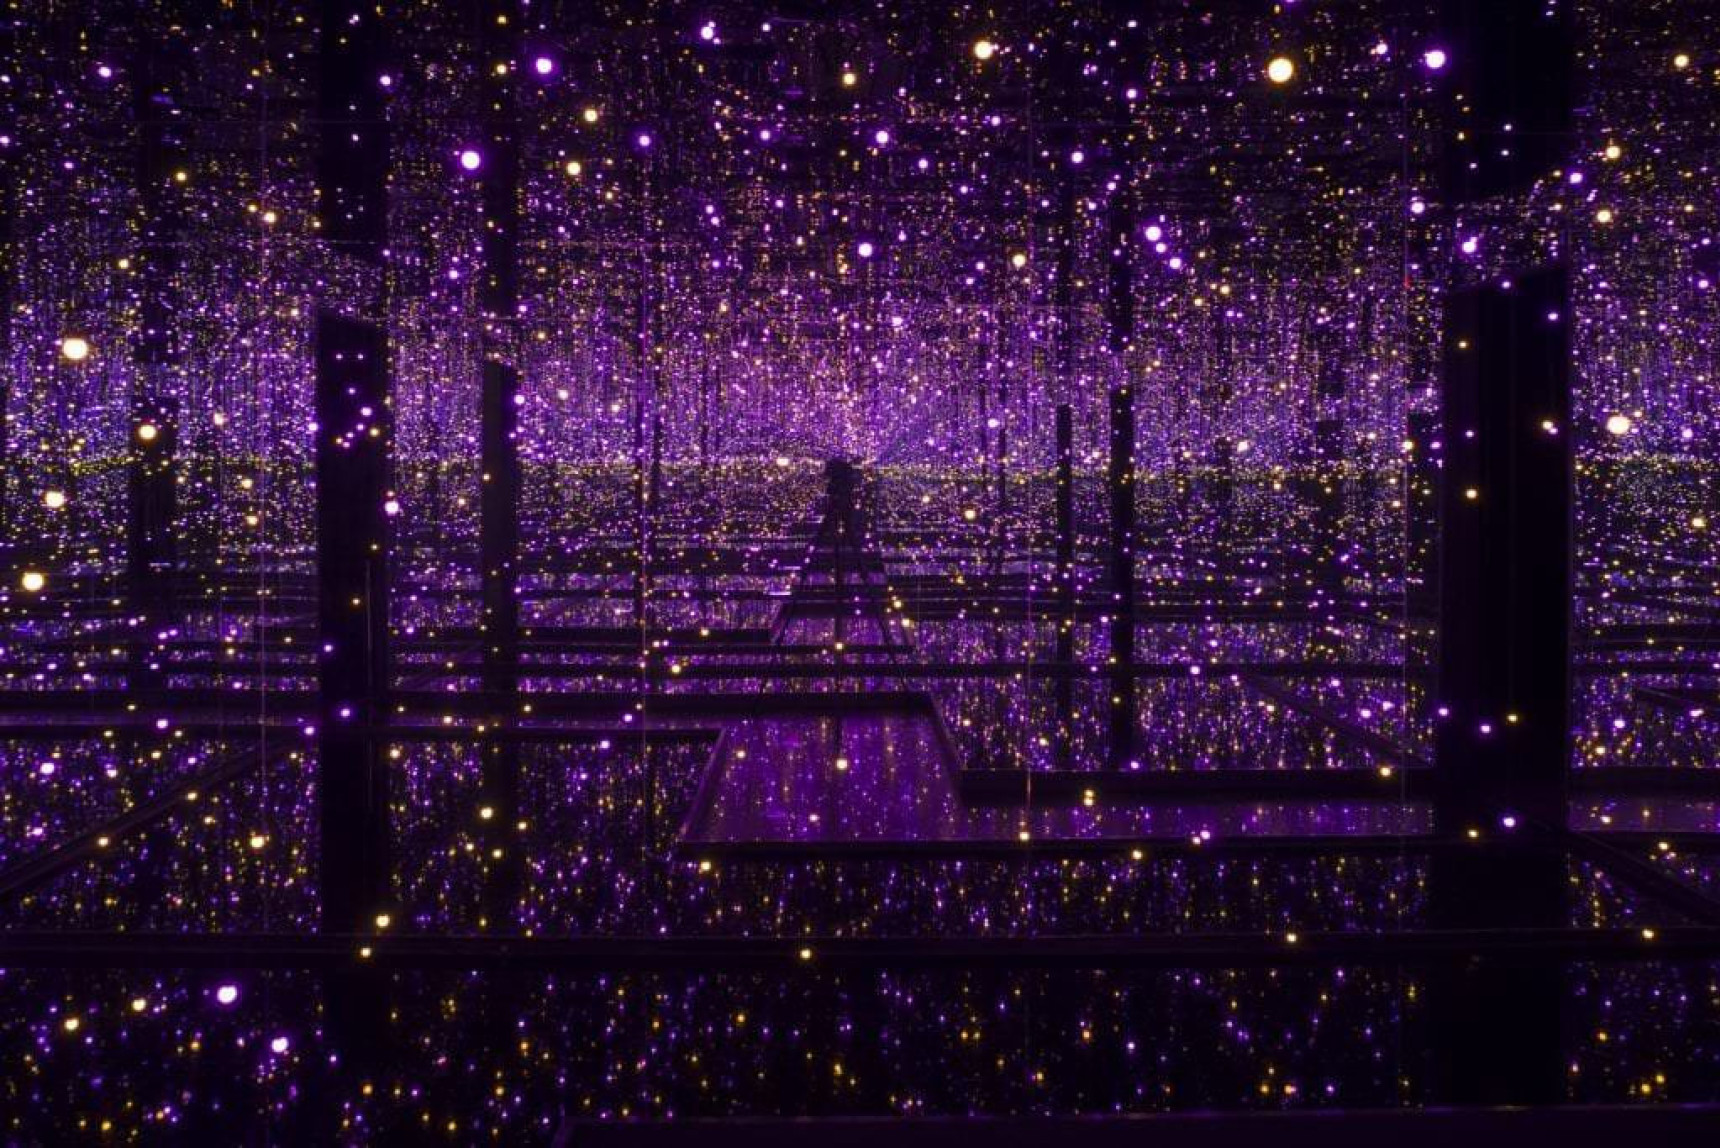  Infinity Mirrored Room - Filled with the Brilliance of Life